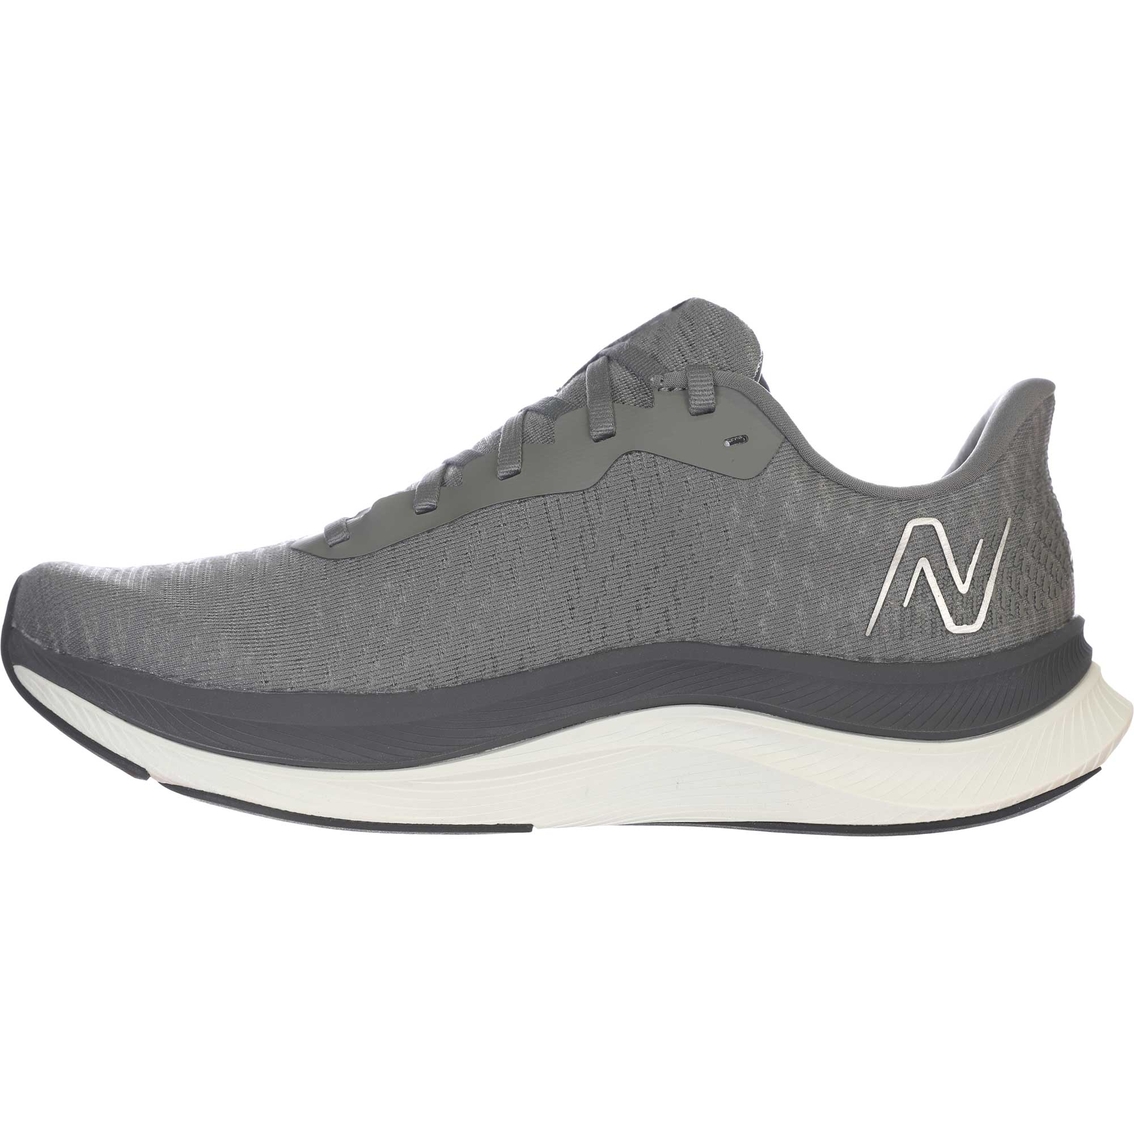 New Balance Men's FuelCell Propel v4 Running Shoes - Image 3 of 4